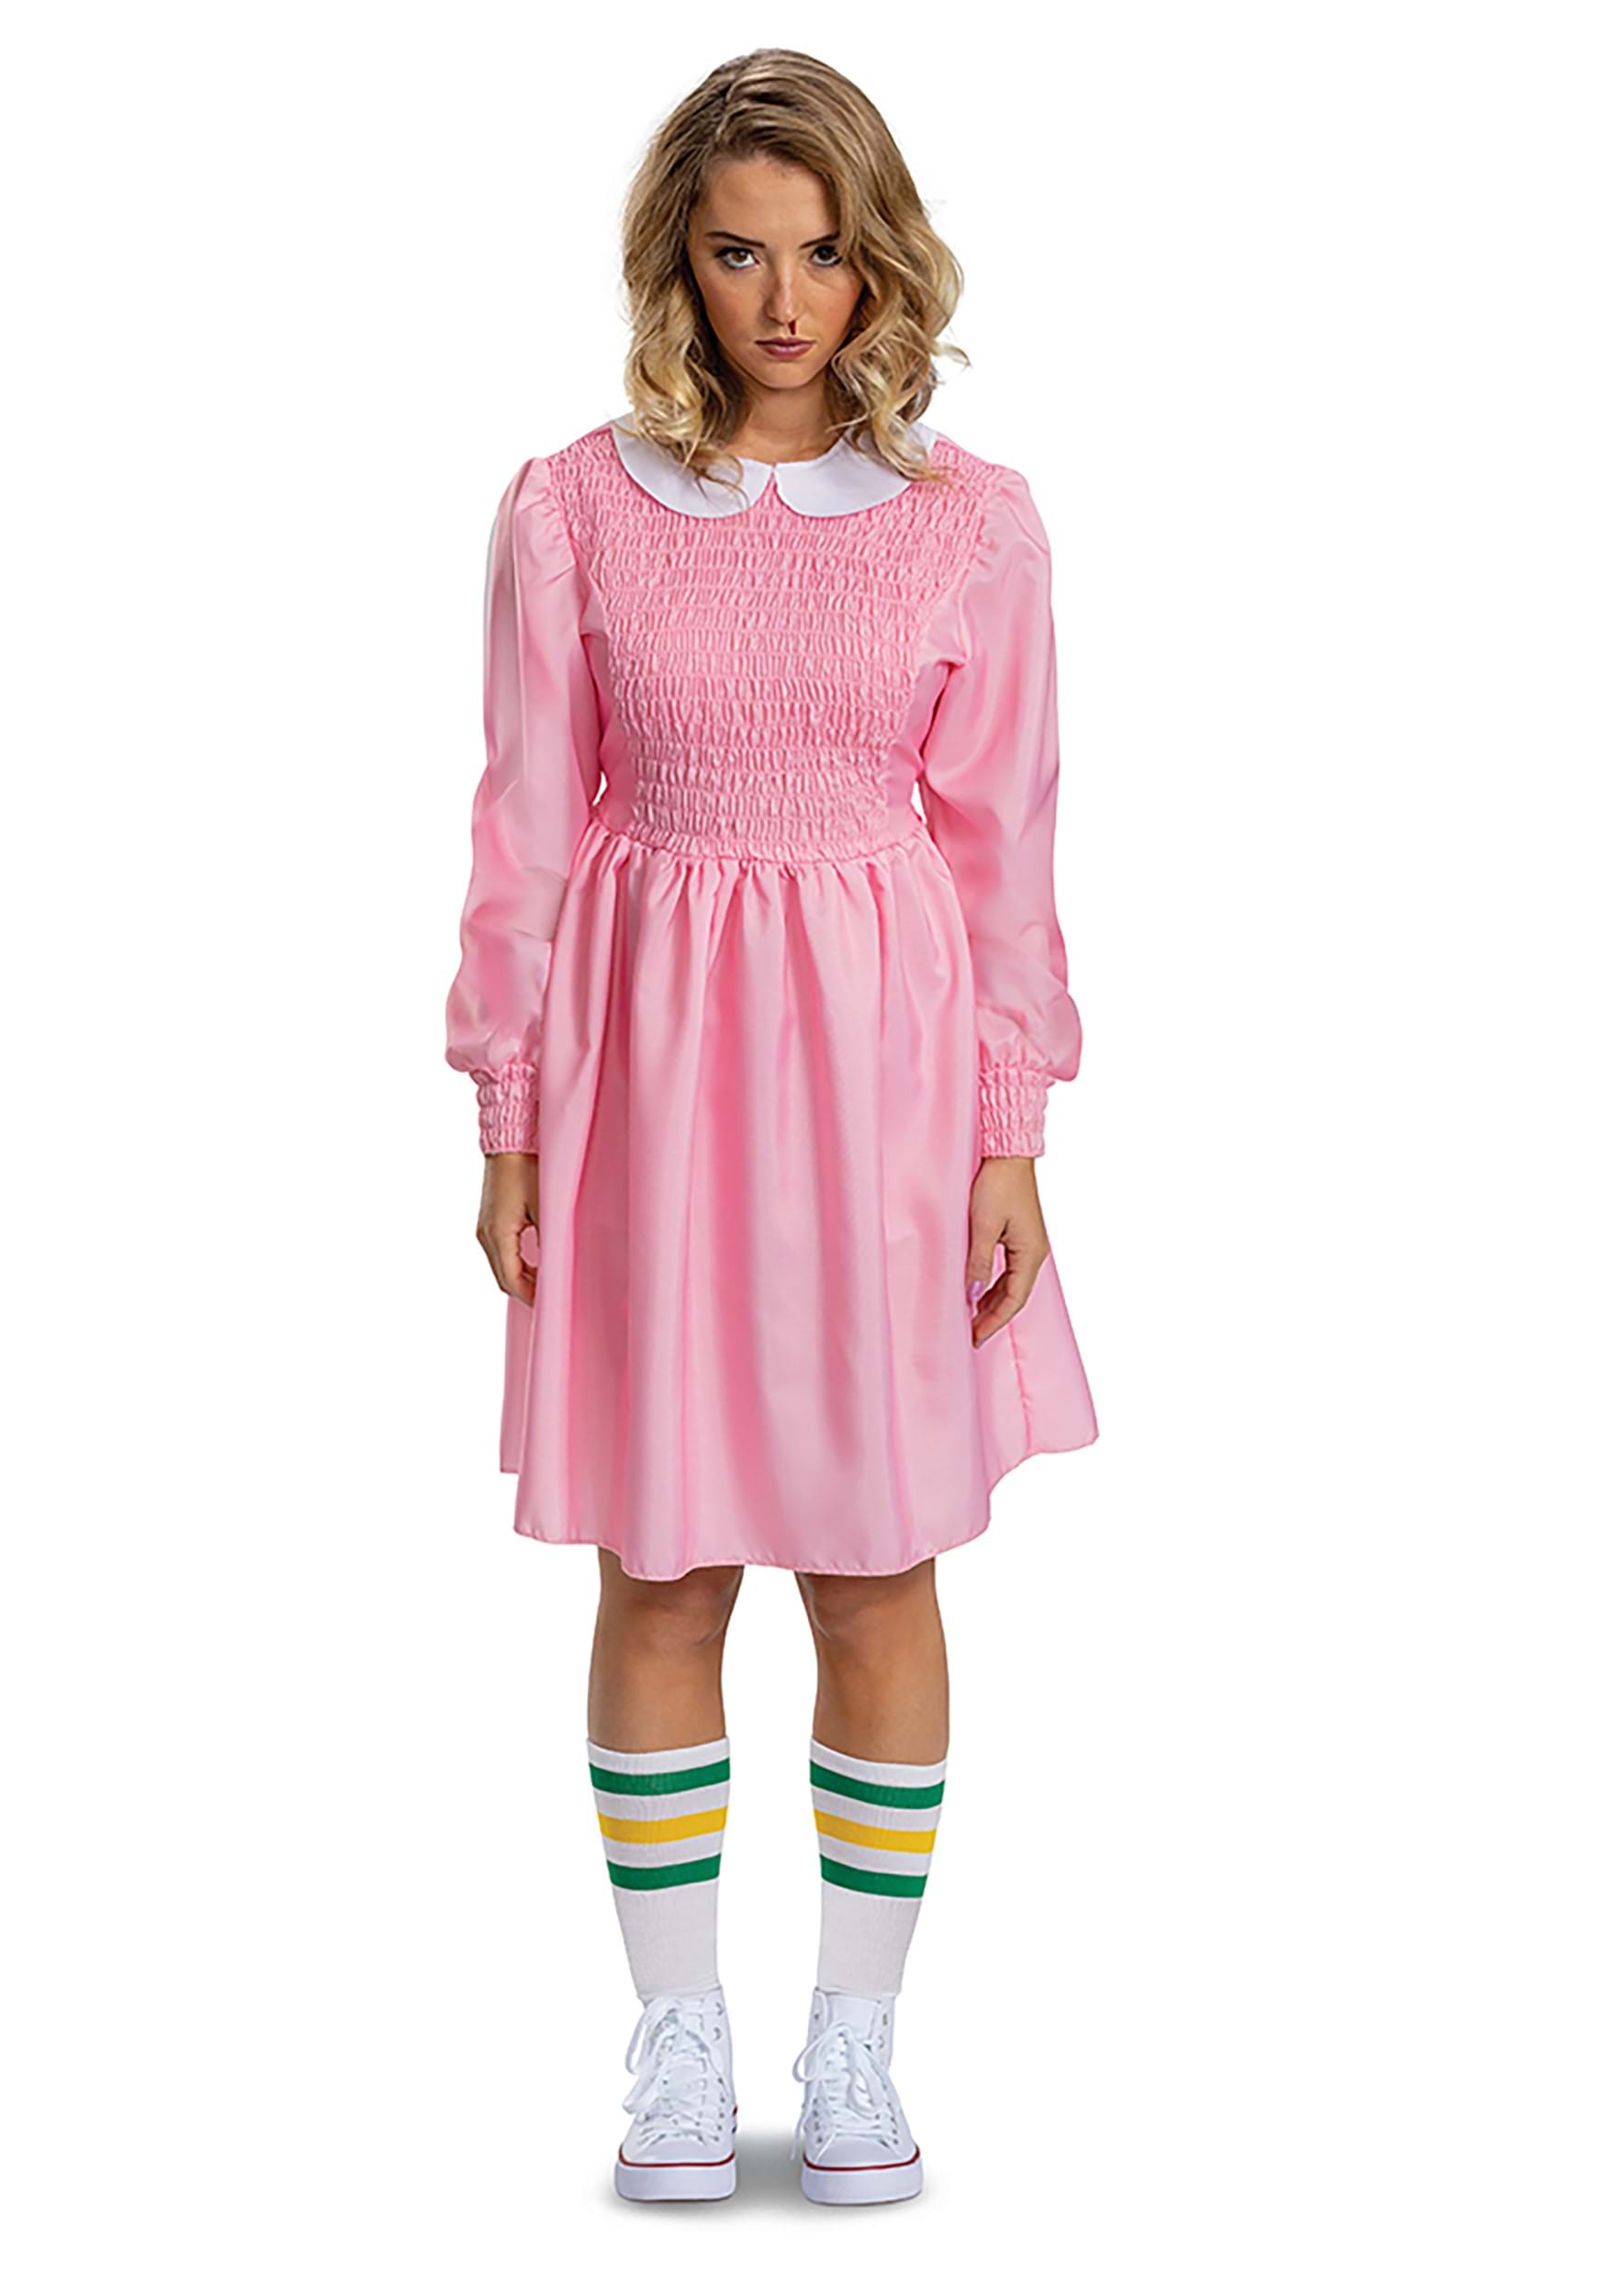 Eleven Womens Stranger Things Adult Deluxe Pink Dress